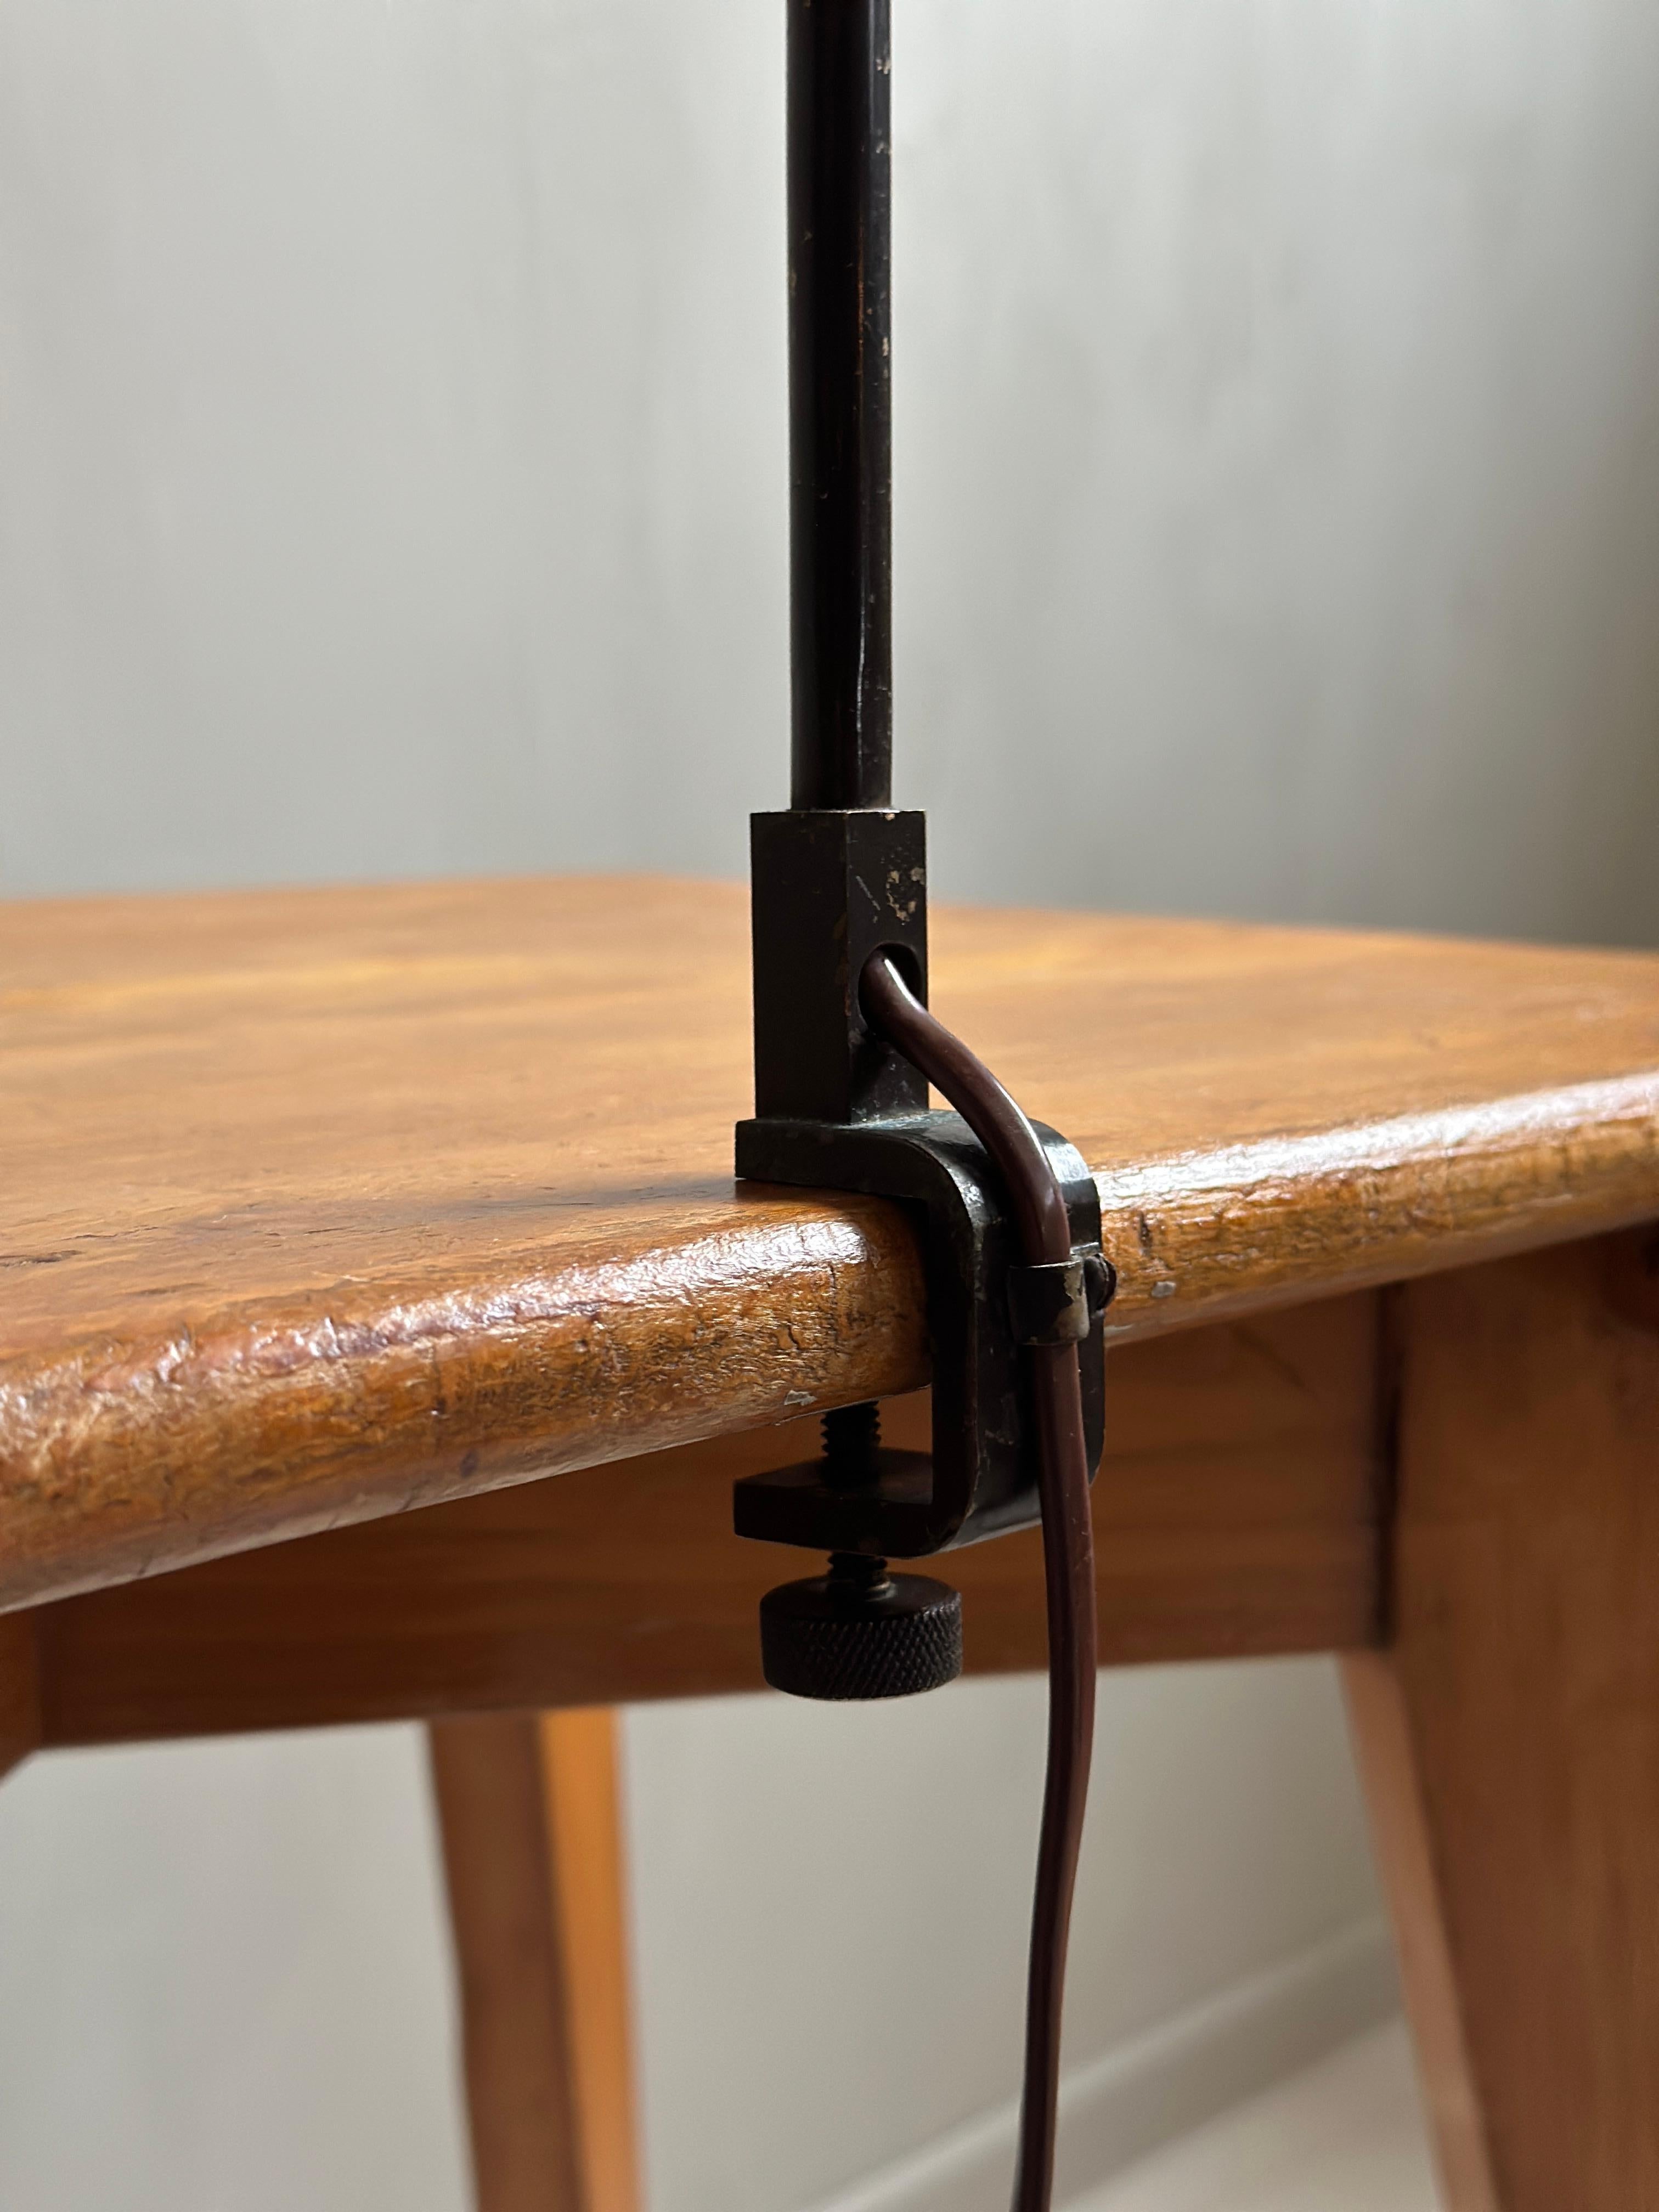 Midcentury Industrial Table Lamp, Scandinavia, circa 1930-1940s For Sale 4